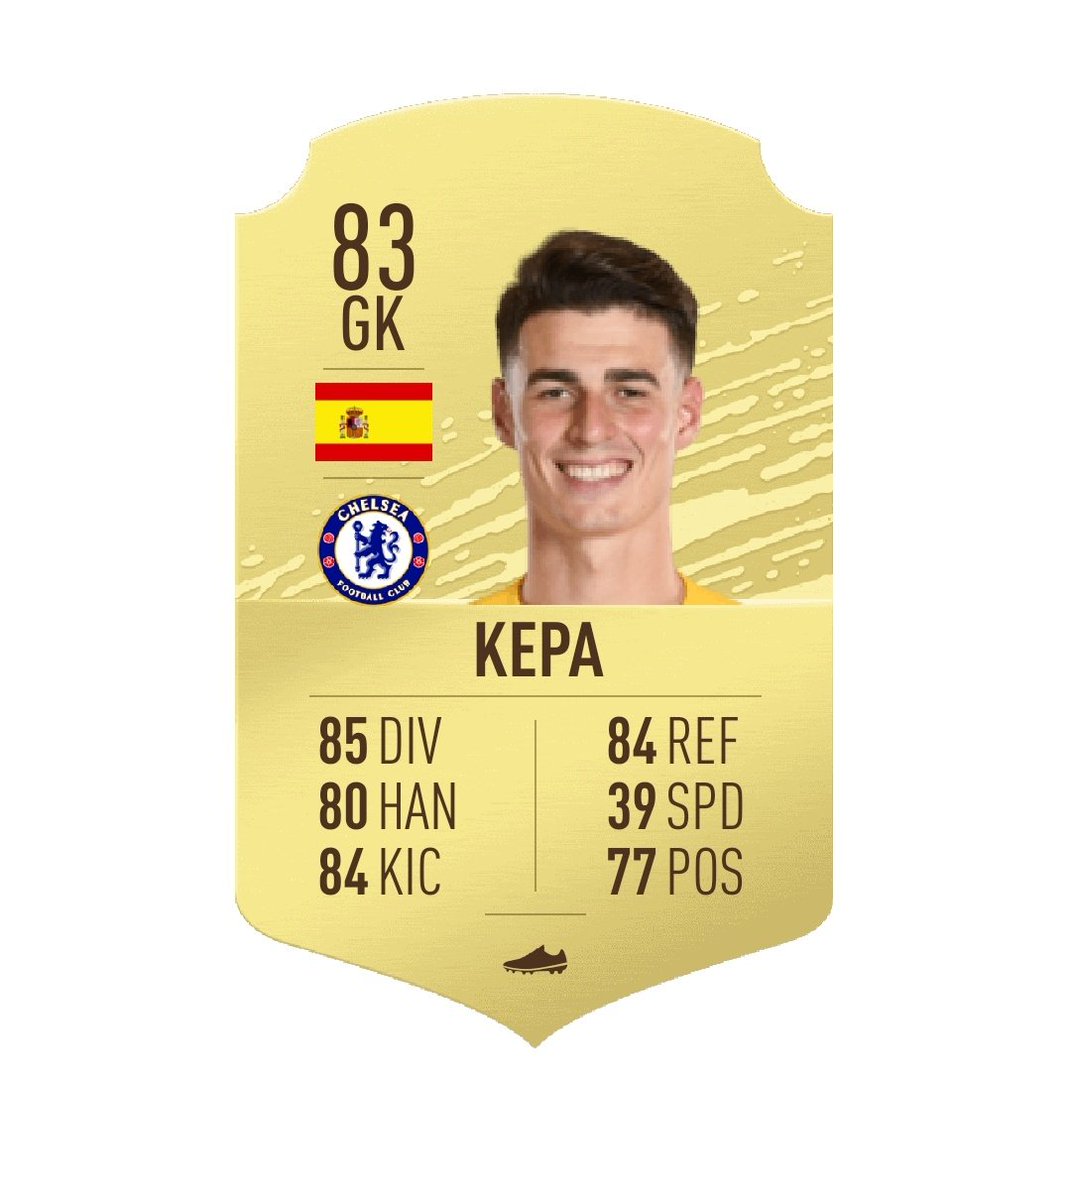 Will there be a new number 1 at Stamford Bridge next season, or will Kepa or Caballero be in goals?